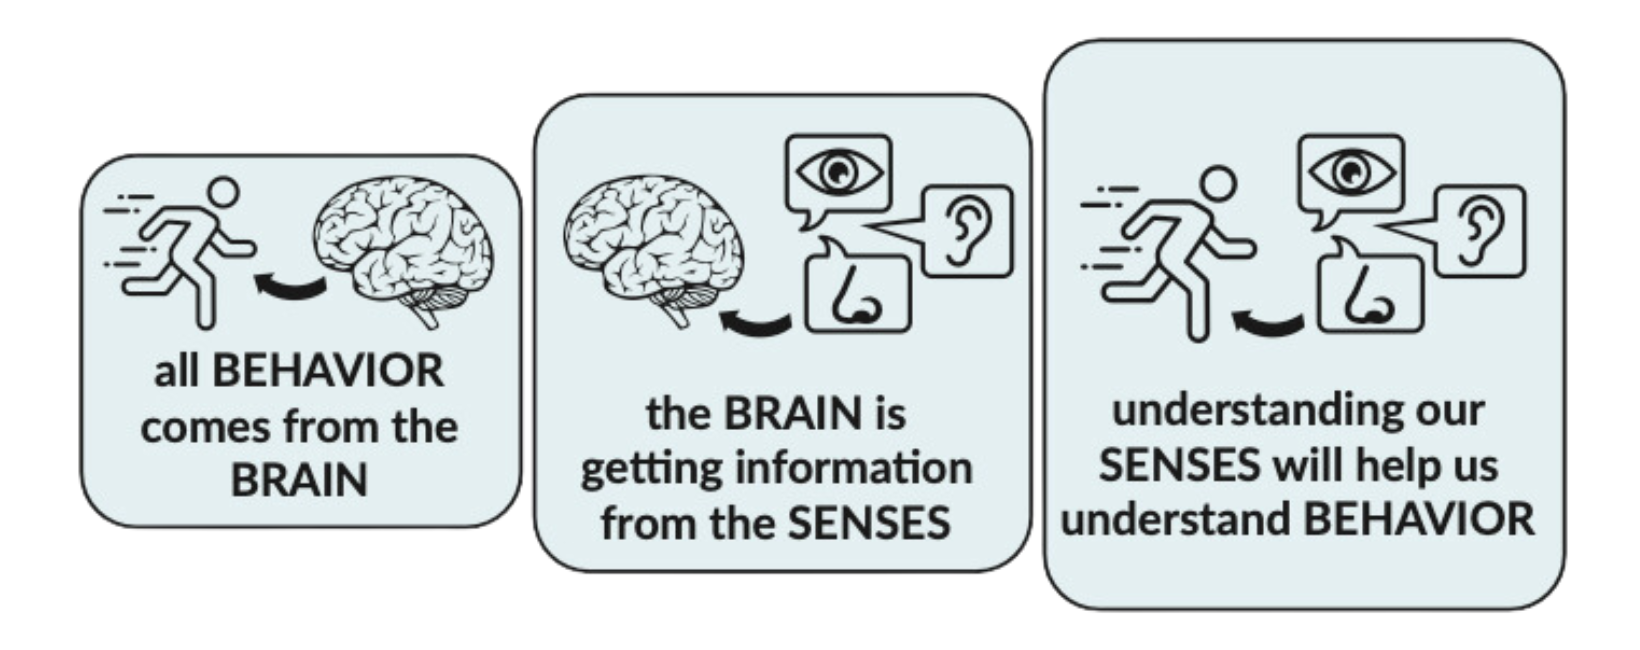 All behavior comes from the brain. The brain is getting information from the senses. Understanding our senses will help us understand behavior.